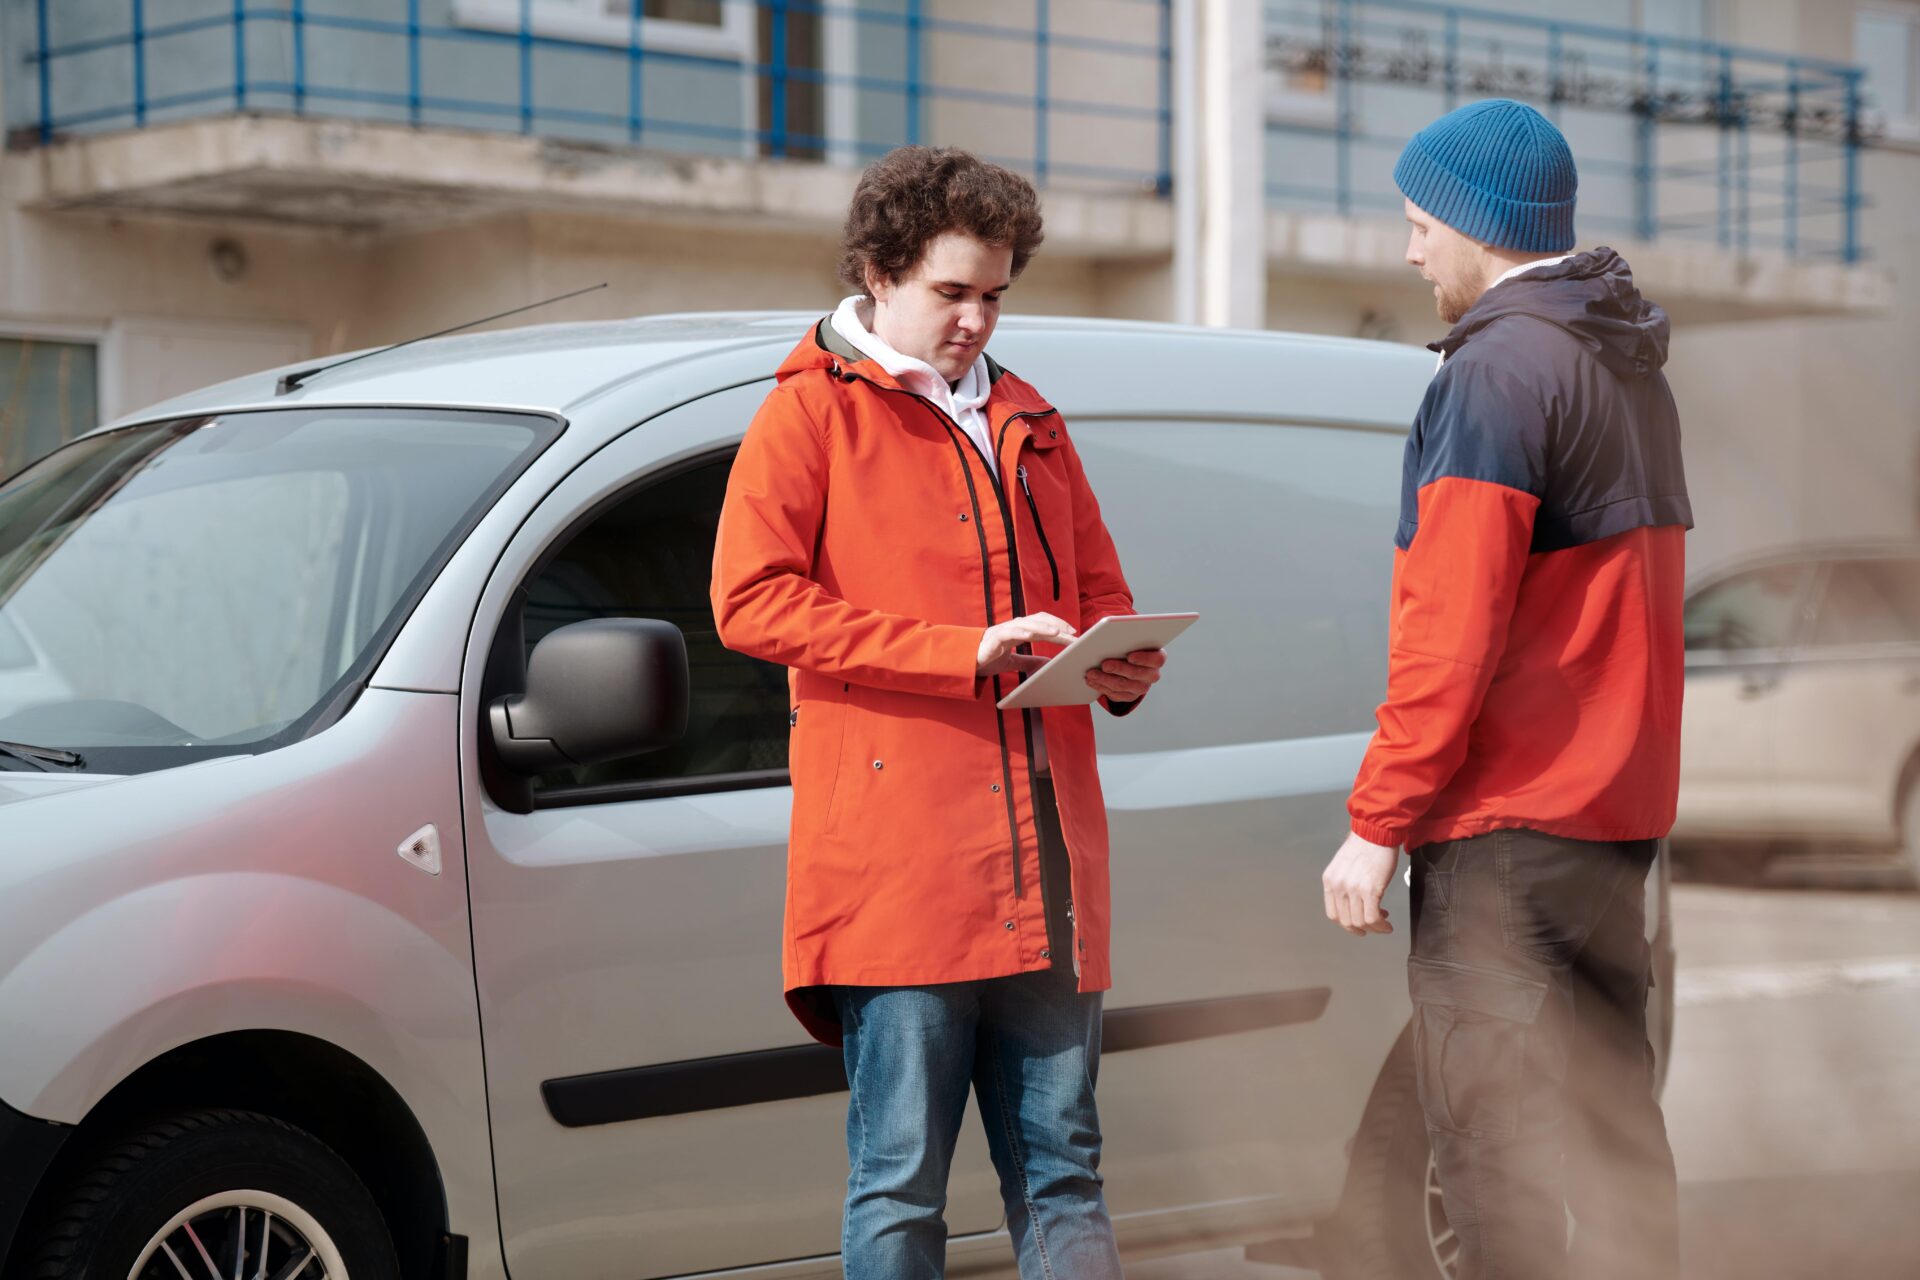 Delivery person exchanging information with a person